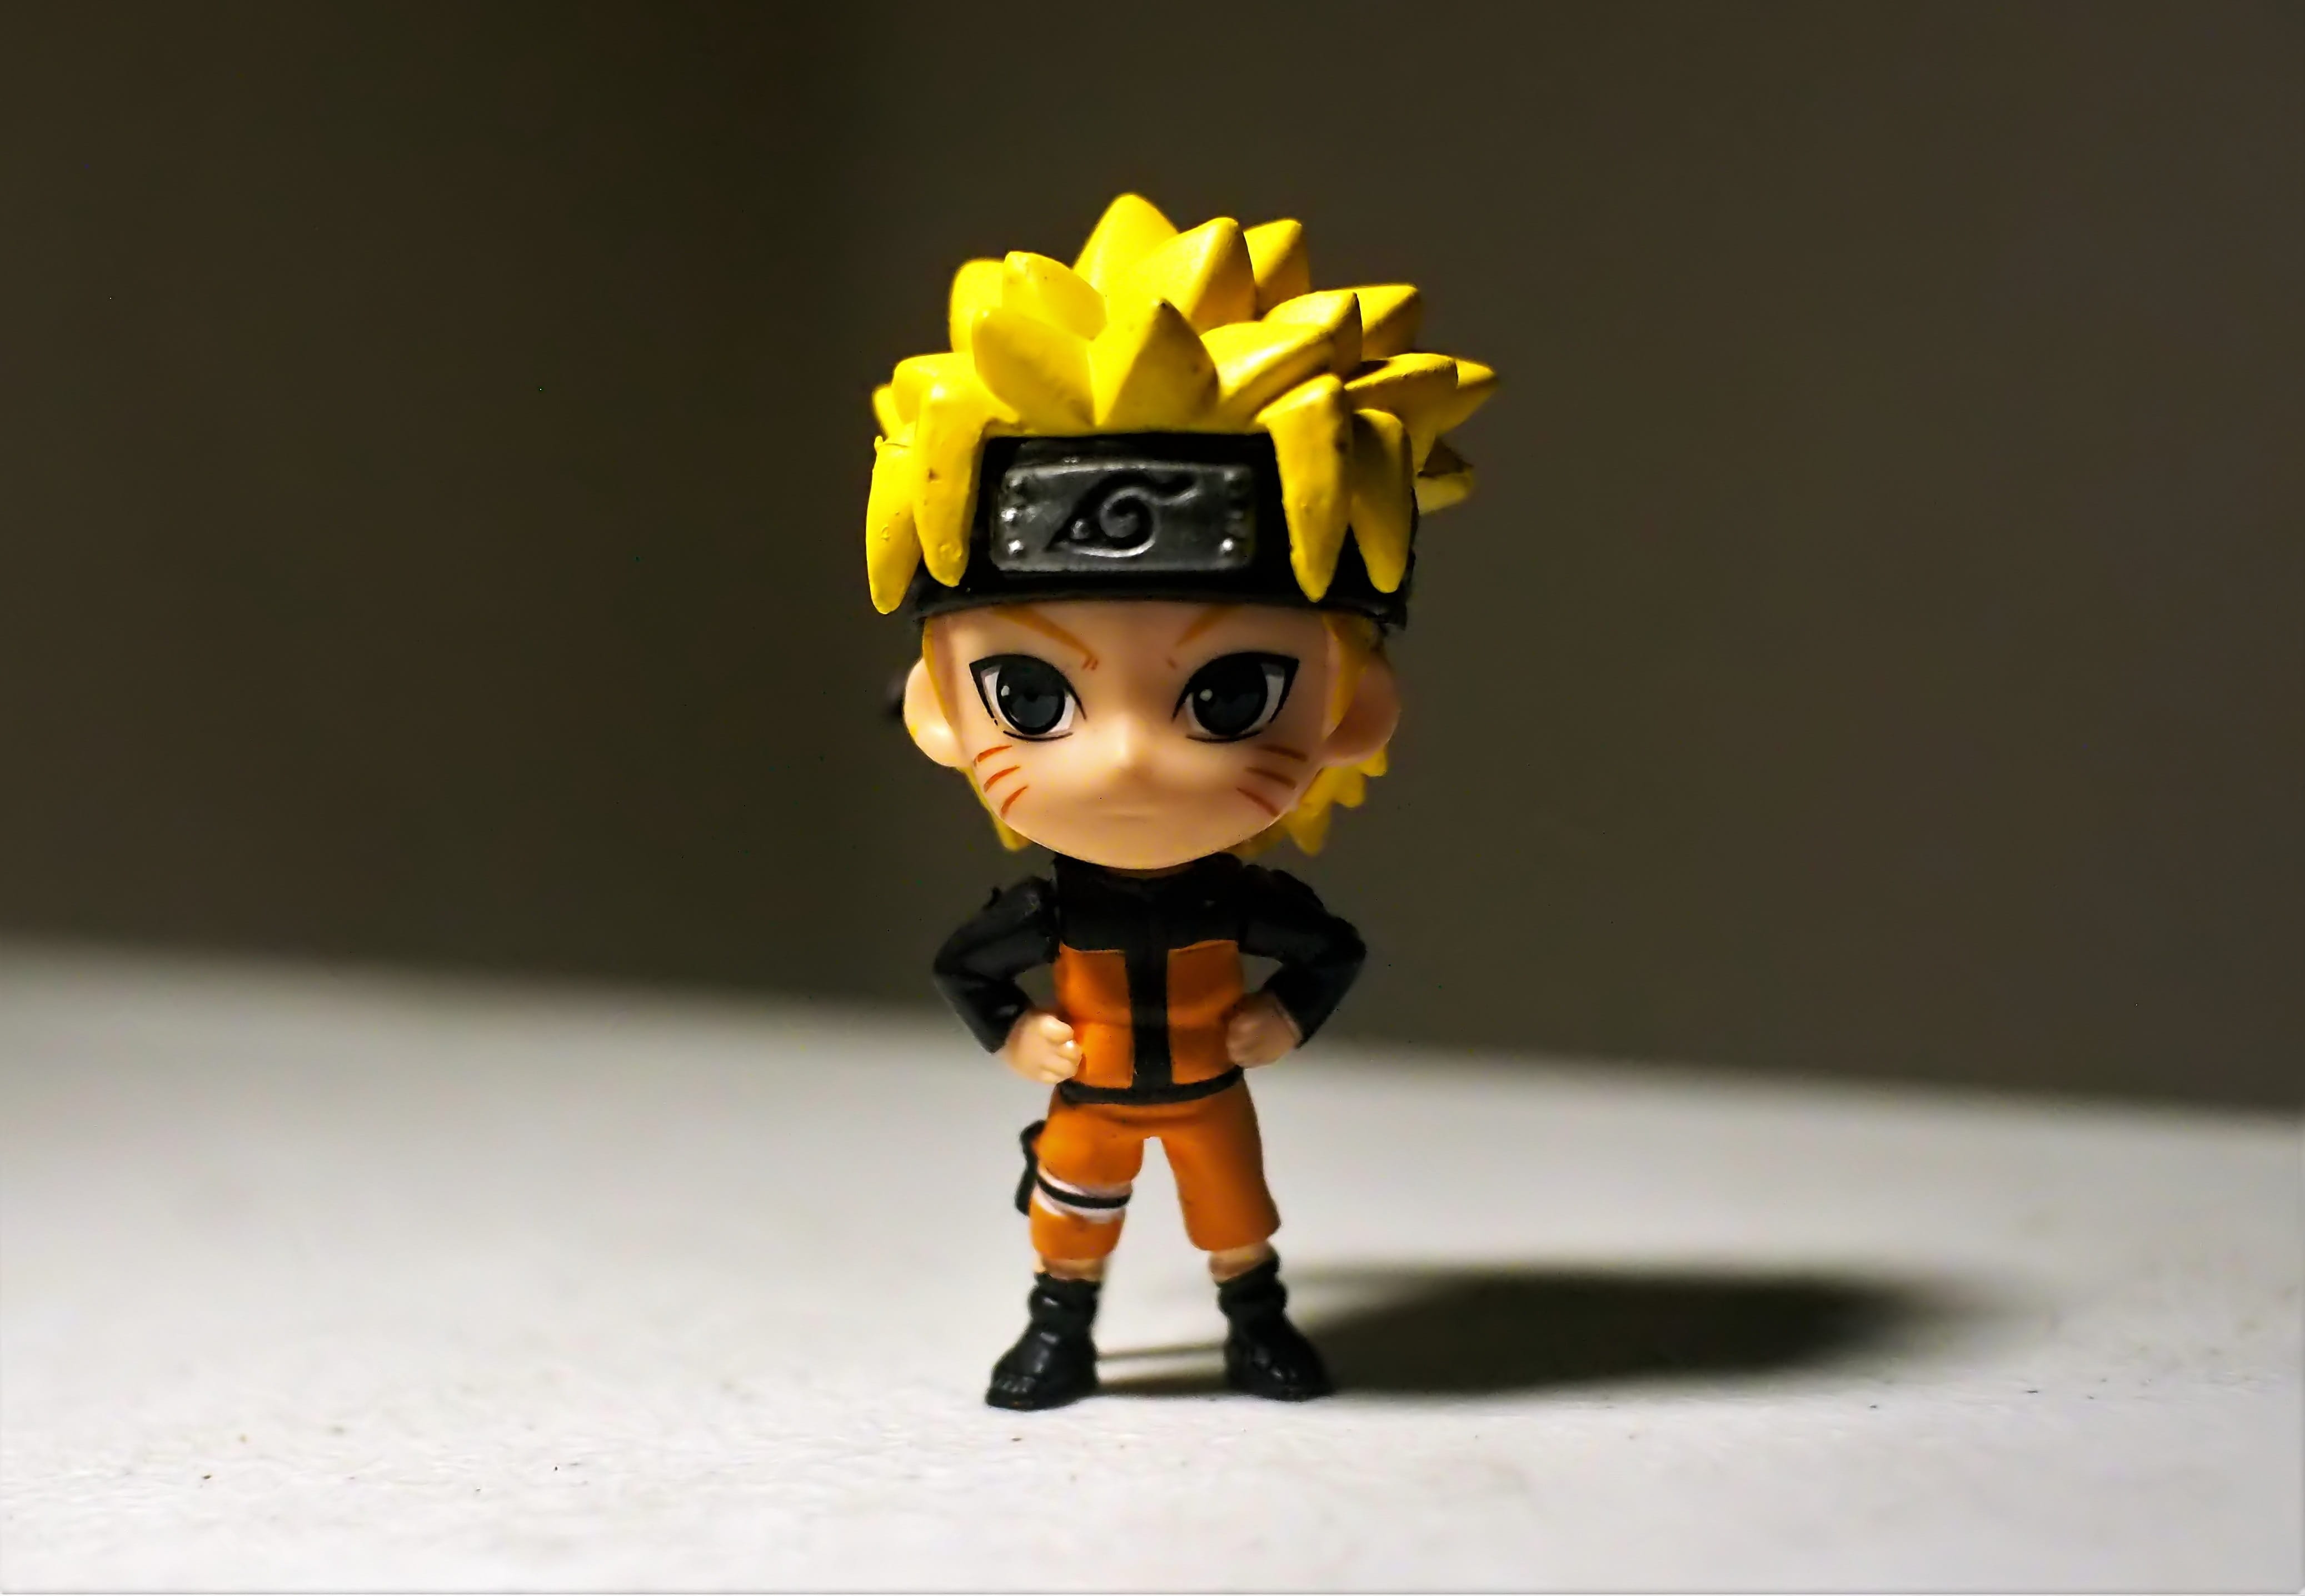 naruto, male, young, boy, cute, toy, figurine, japanese, anime